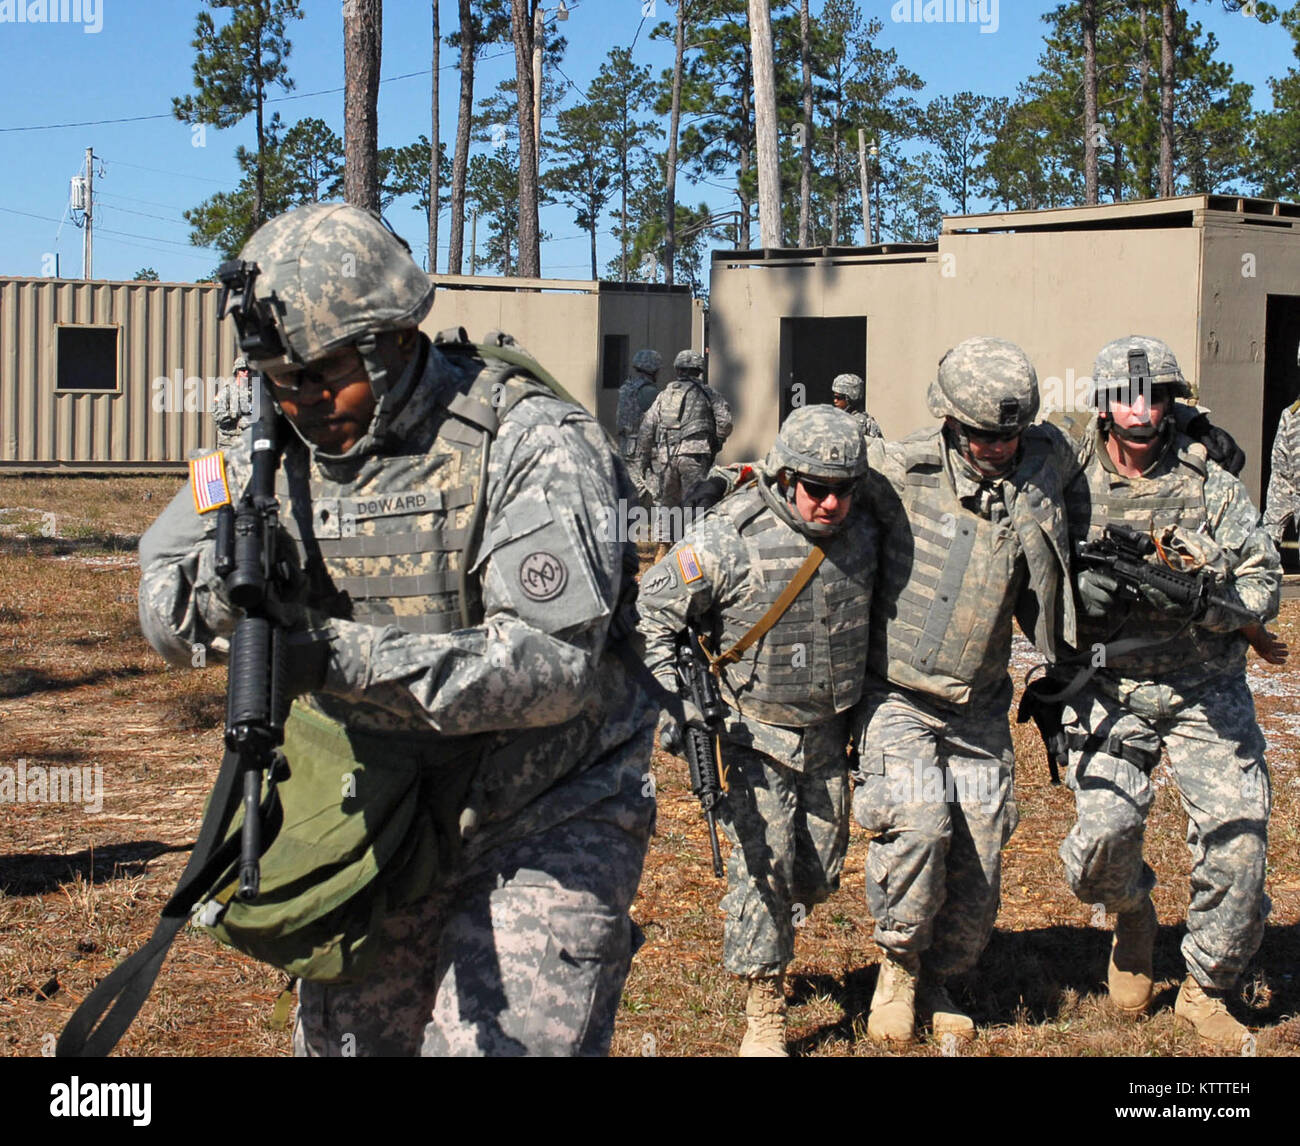 CAMP SHELBY, MS -- Spc. Charles Doward, far left, provides security for Sgt. 1st Class Vince Tomasella, left, and Master John Tyler, right, as they carry a mock casualty to a casualty collection point during combat lifesaver training here on Feb. 11. Sgt. 1st Class Kevin Black is playing the casualty, and all four Soldiers belong to Headquarters and Headquarters Company, 27th Infantry Brigade Combat Team. Doward is from Brooklyn, N.Y., Tomasella is from Rochester, N.Y., Tyler is from Adams, N.Y. and Black is from Kenmore, N.Y.  (Photo by Sgt. 1st Class Raymond Drumsta, 27th IBCT Public Affairs Stock Photo